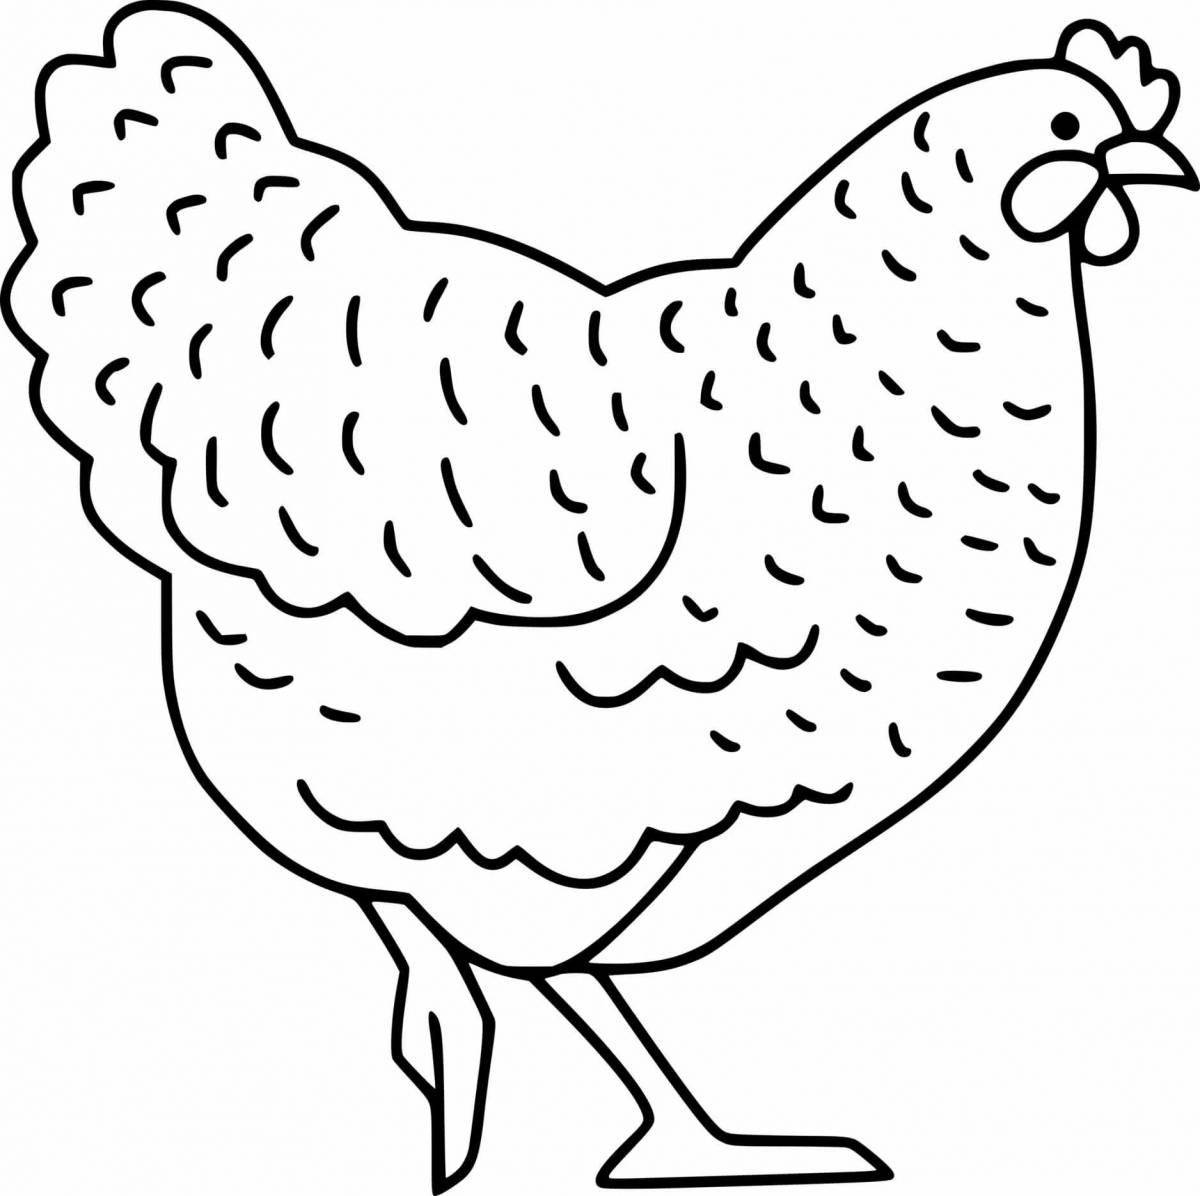 Fancy chicken coloring for kids